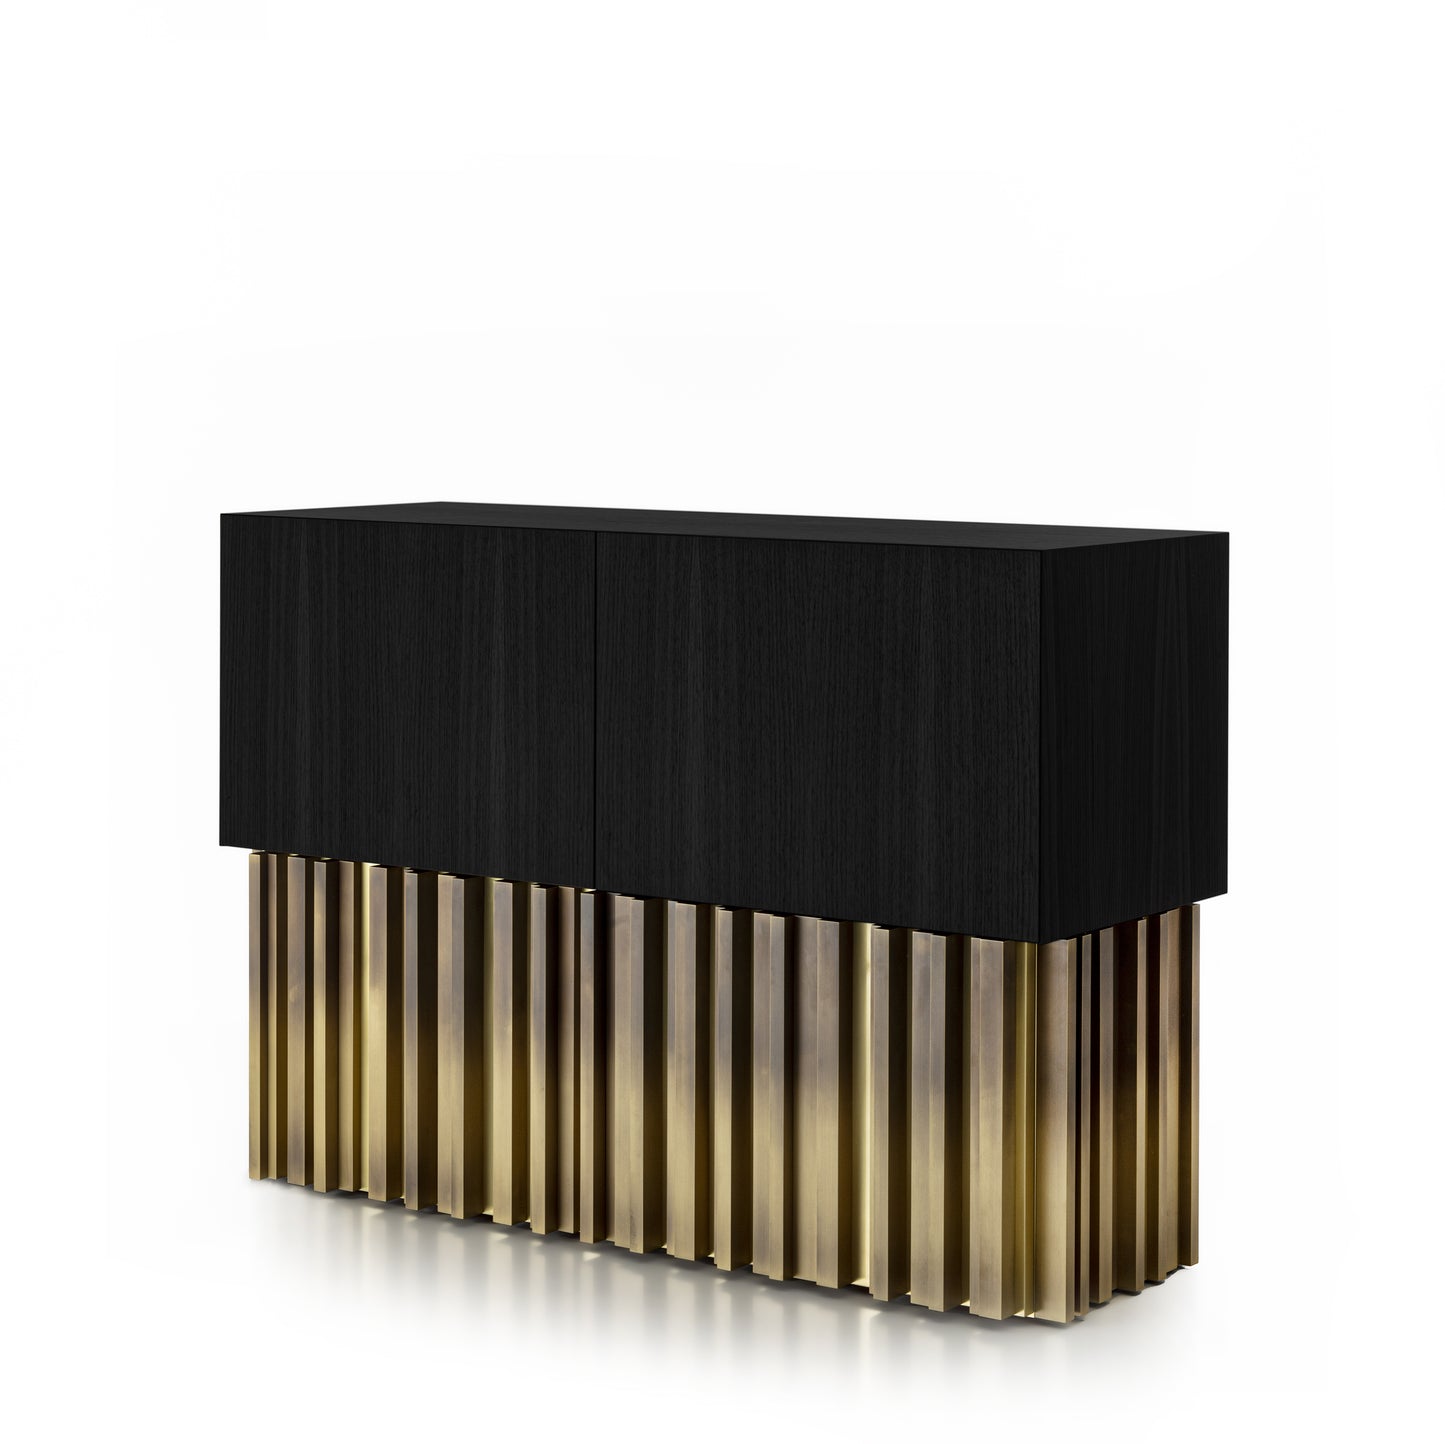 Sublime Vintage Sideboard with Brass Handmade Sculpture in Opaque Black Open Pore Striped Oak